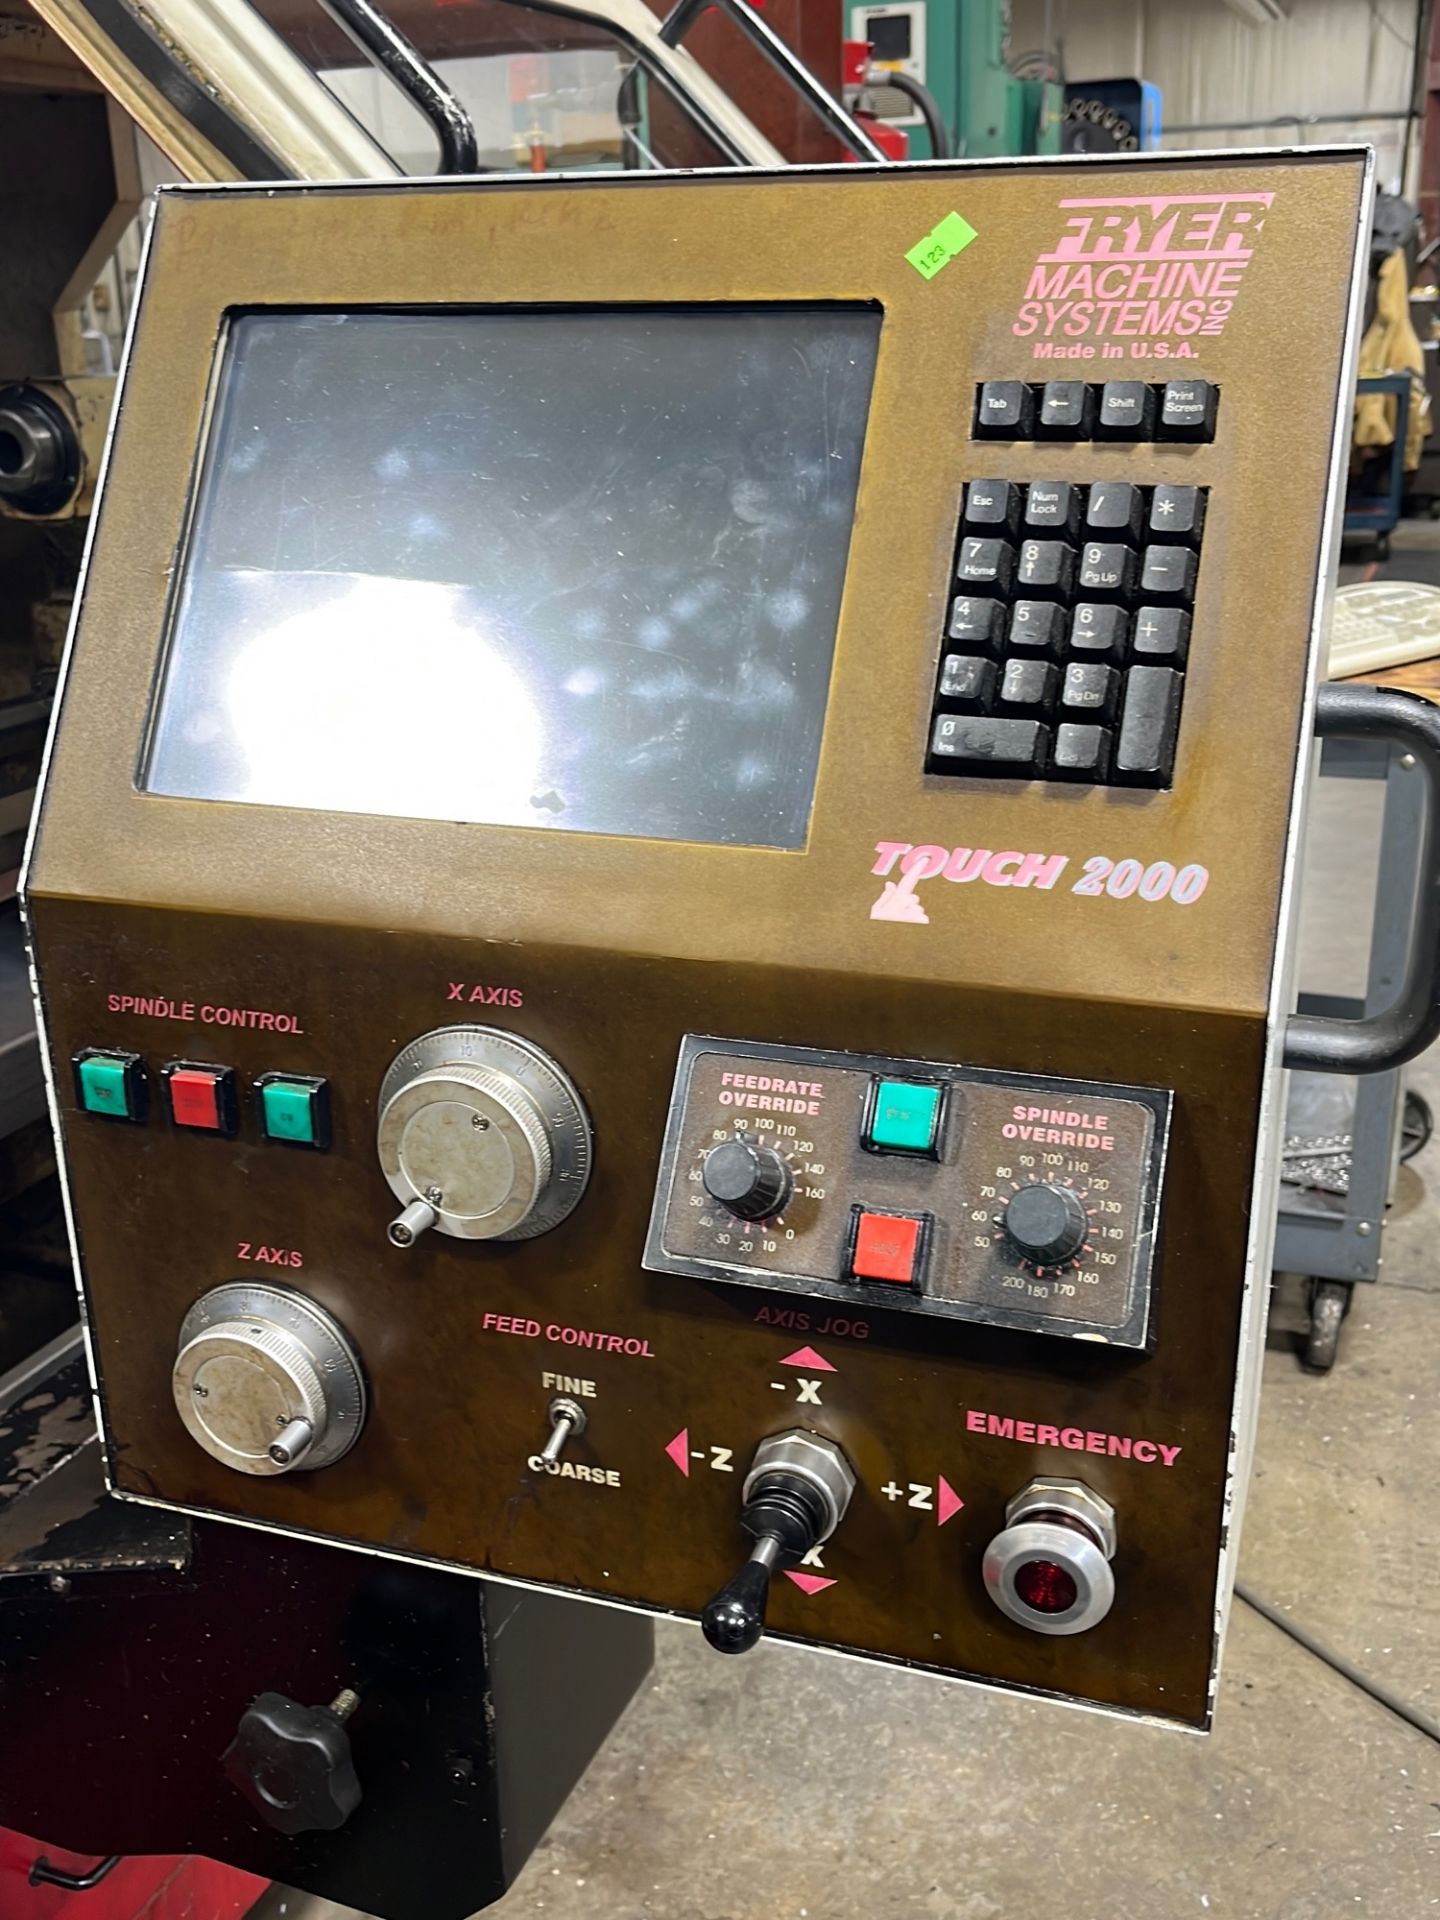 Fryer model ET-18 CNC lathe serial number 18086 - A $700 Rigging fee will be added to the winning in - Image 3 of 11